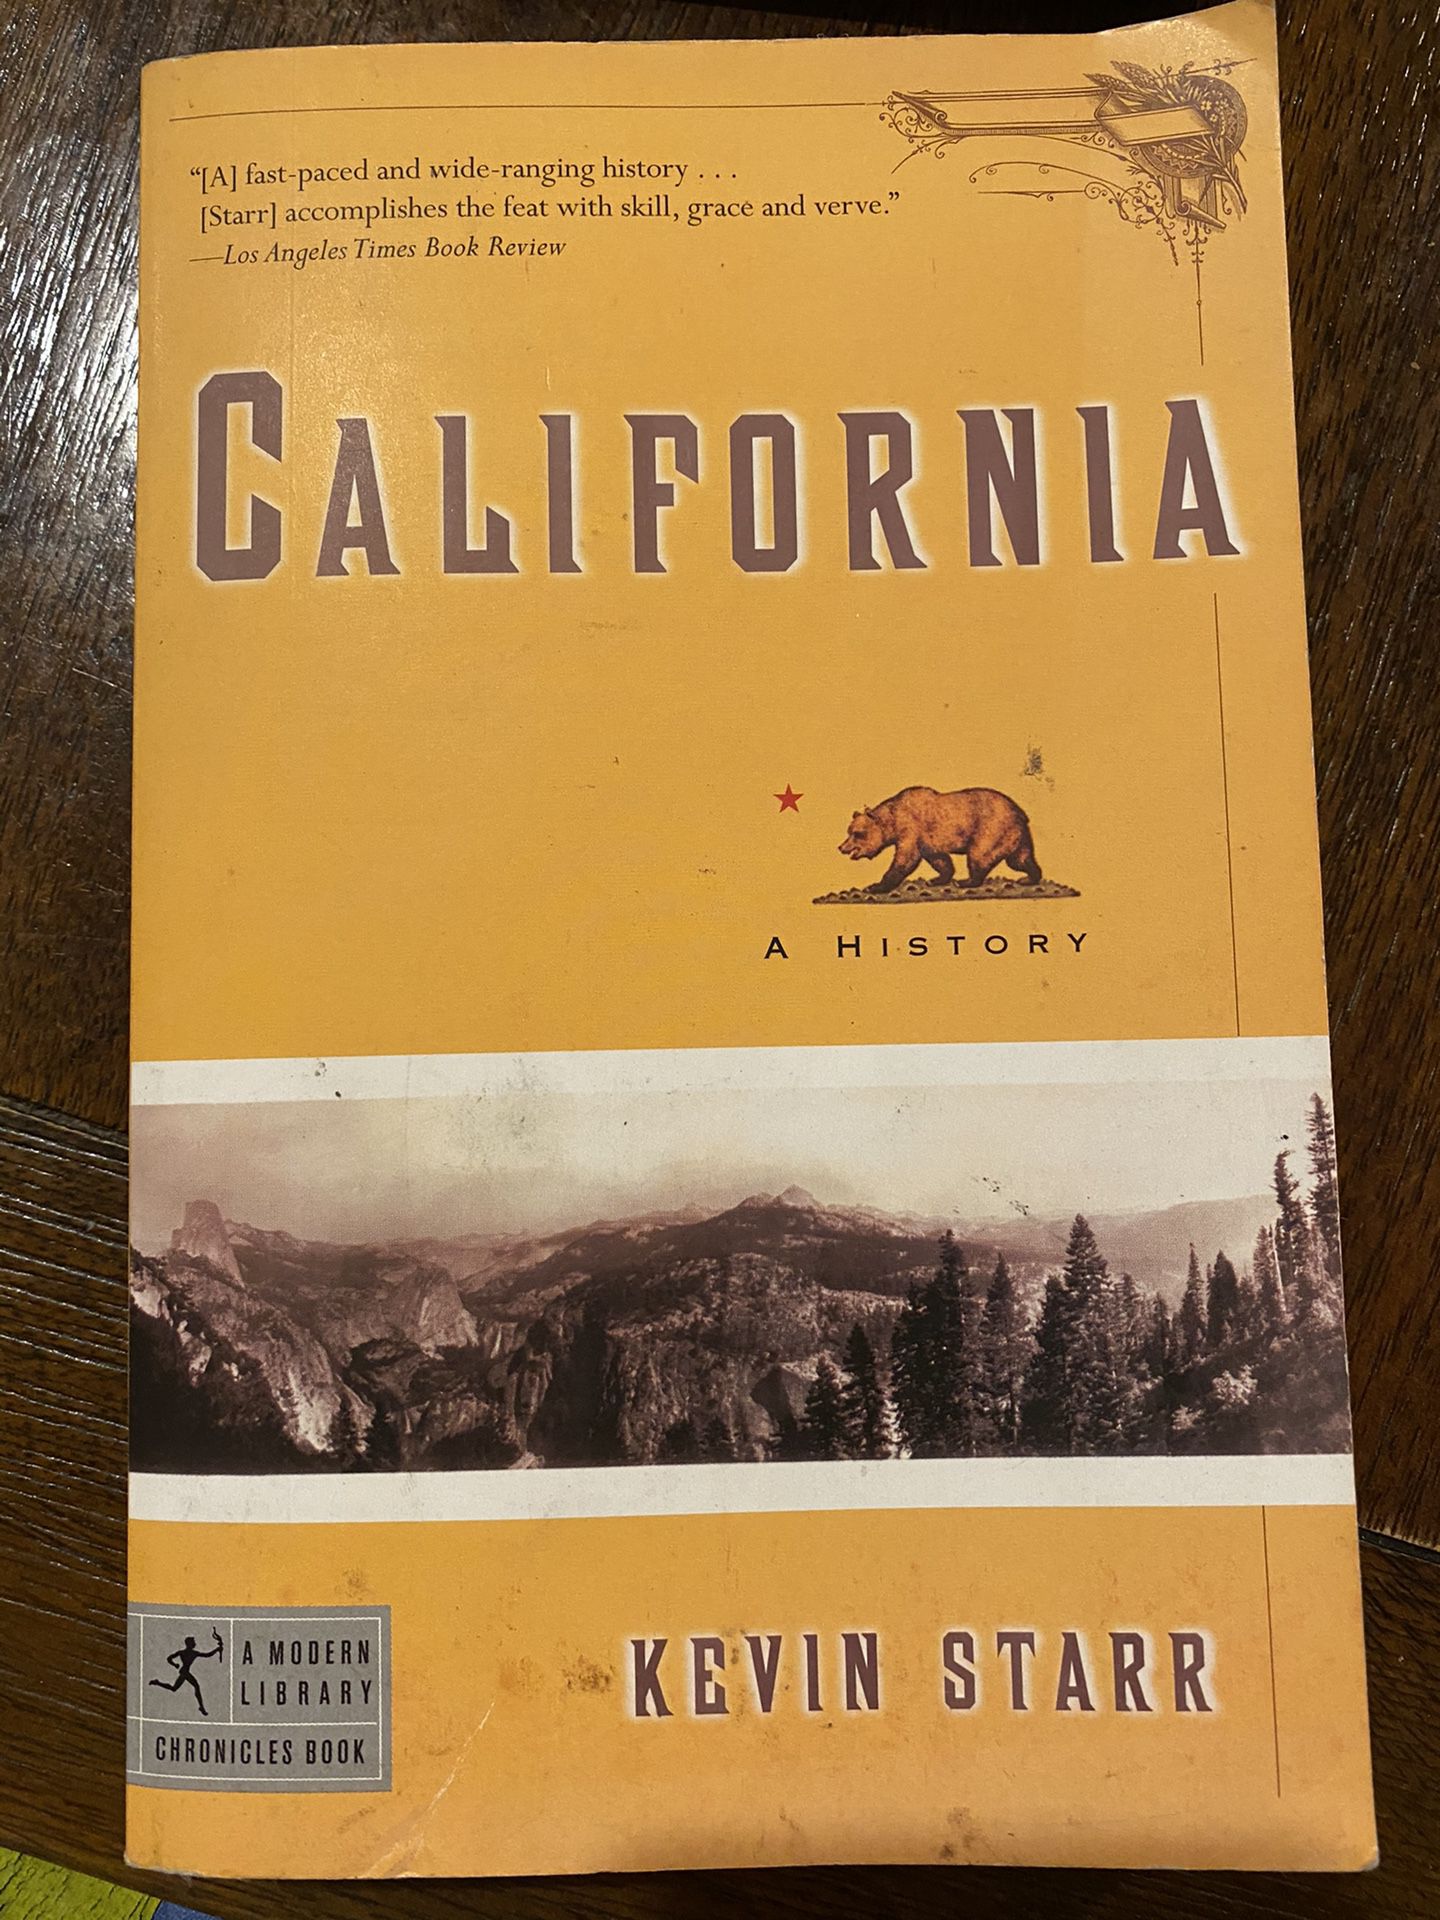 California by Kevin Starr